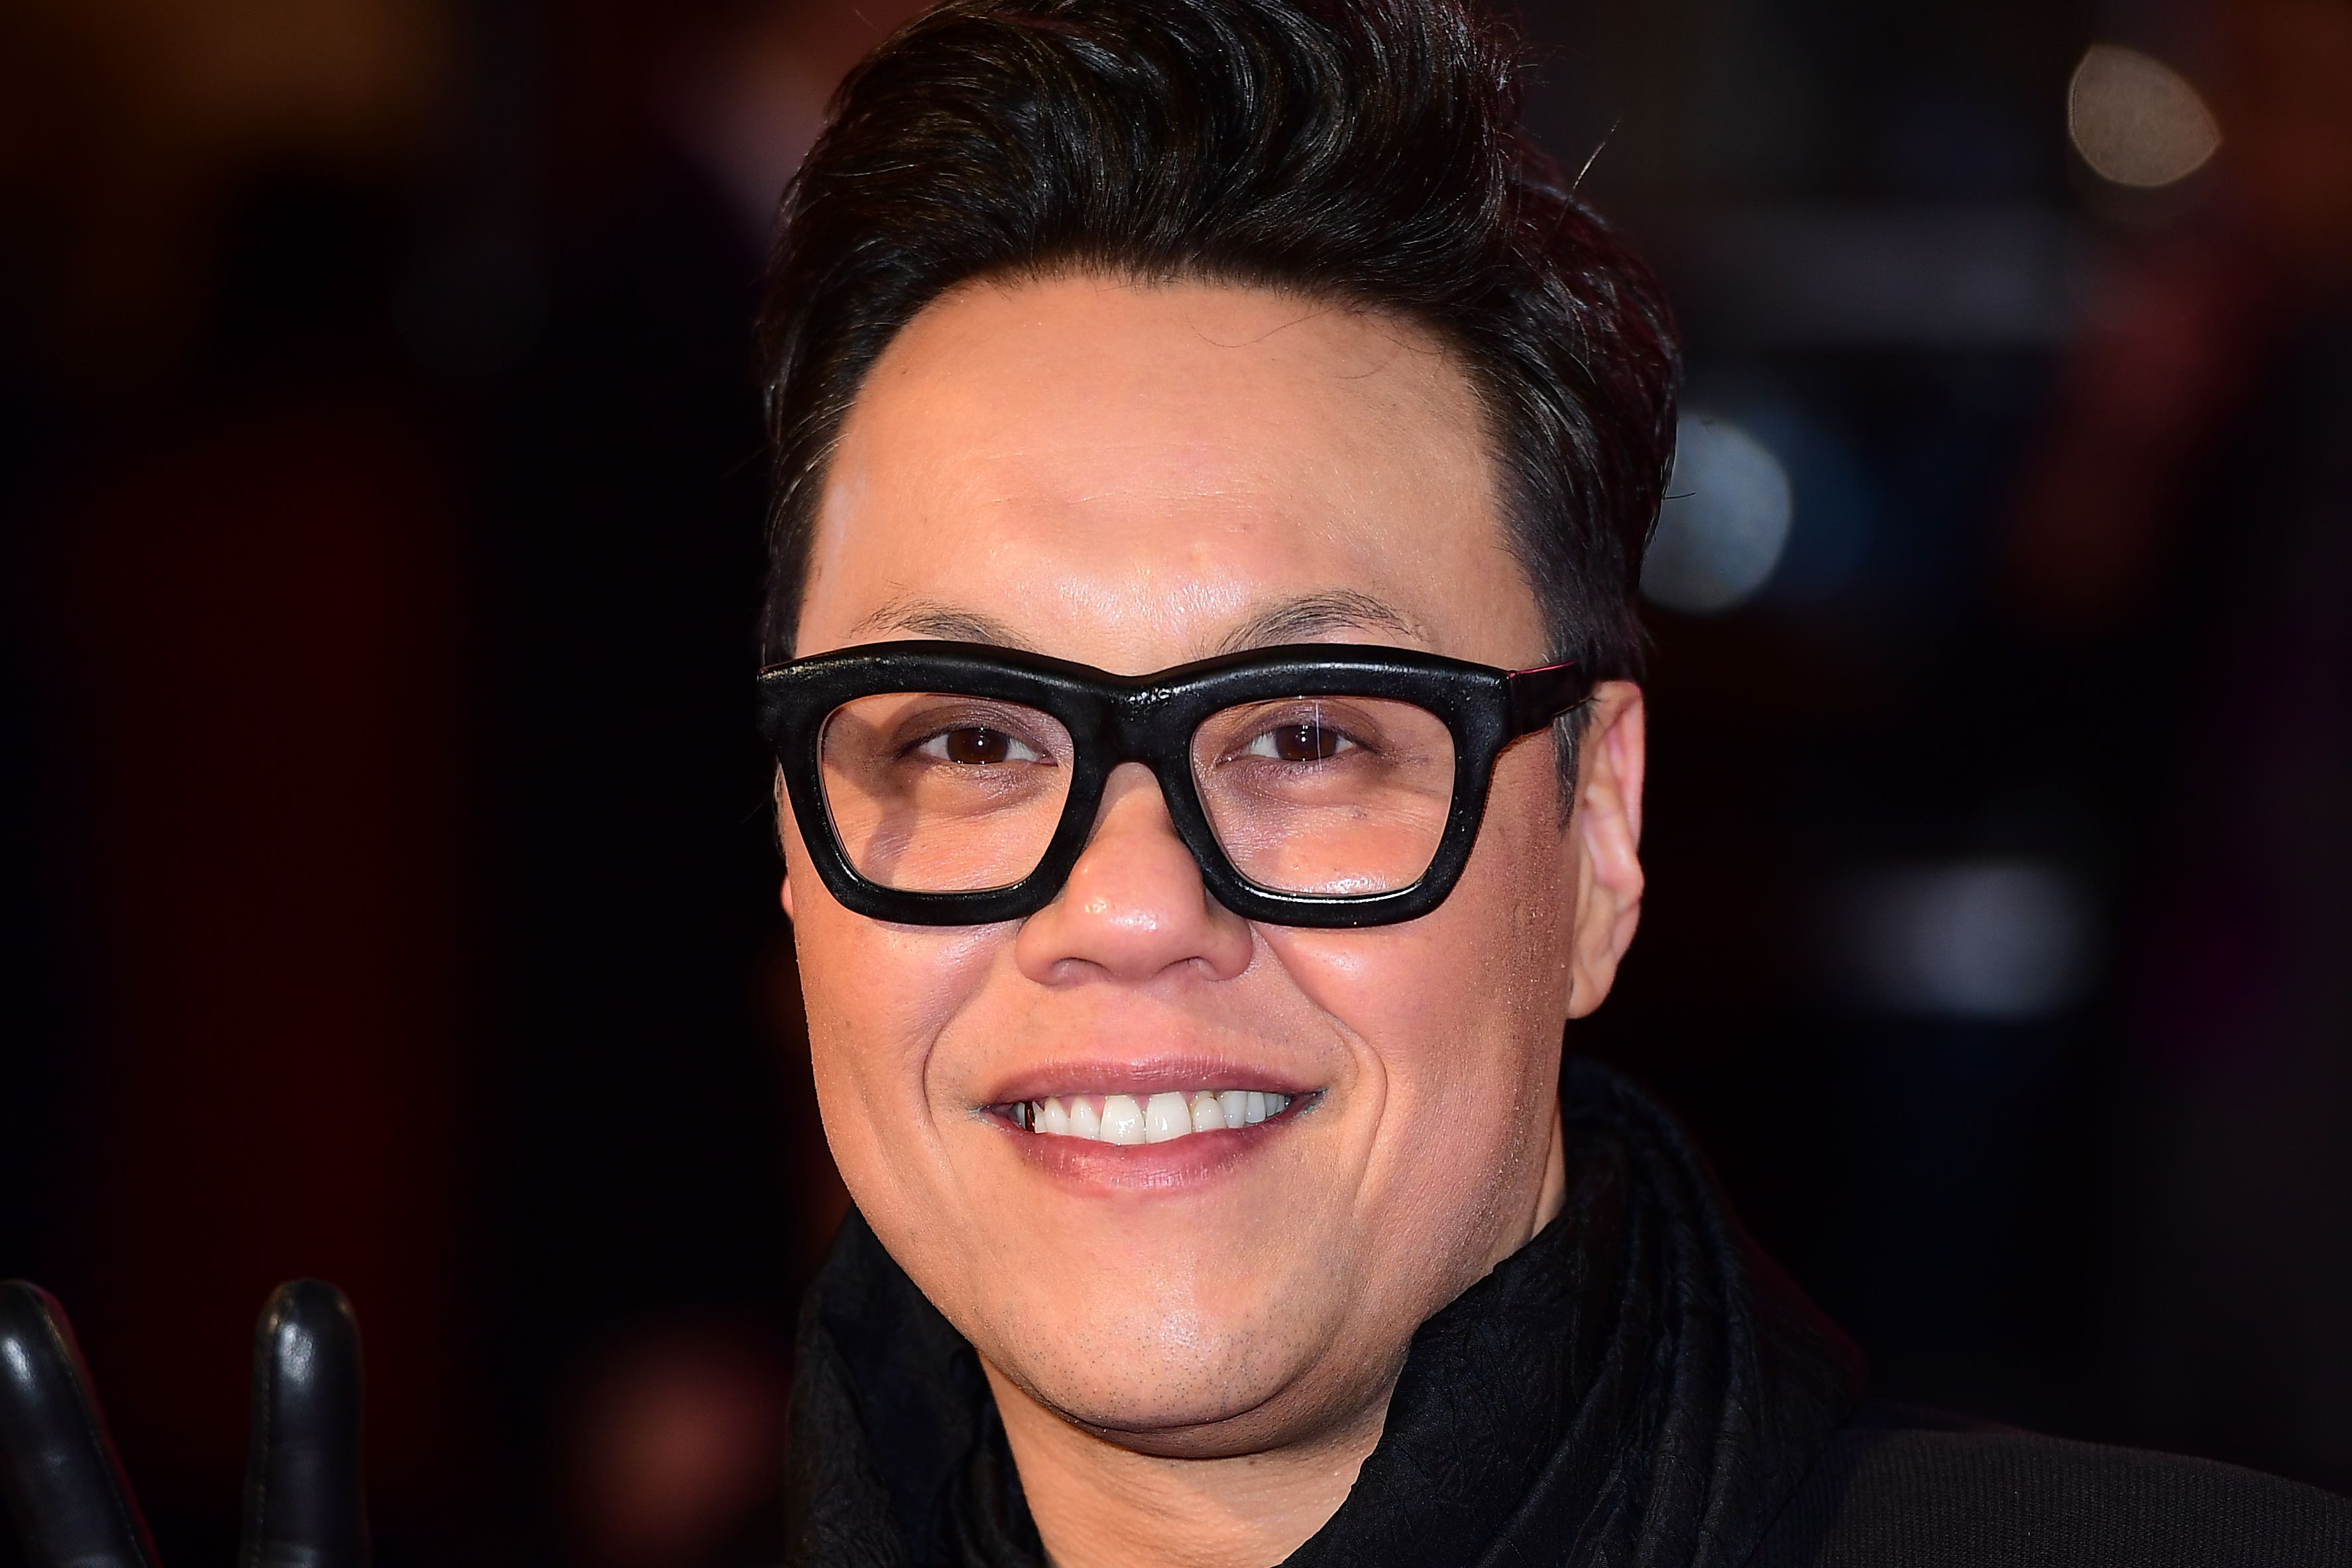 Gok Wan said Pride is a “chance for our wonderful community to come together and be seen” (Ian West/PA)